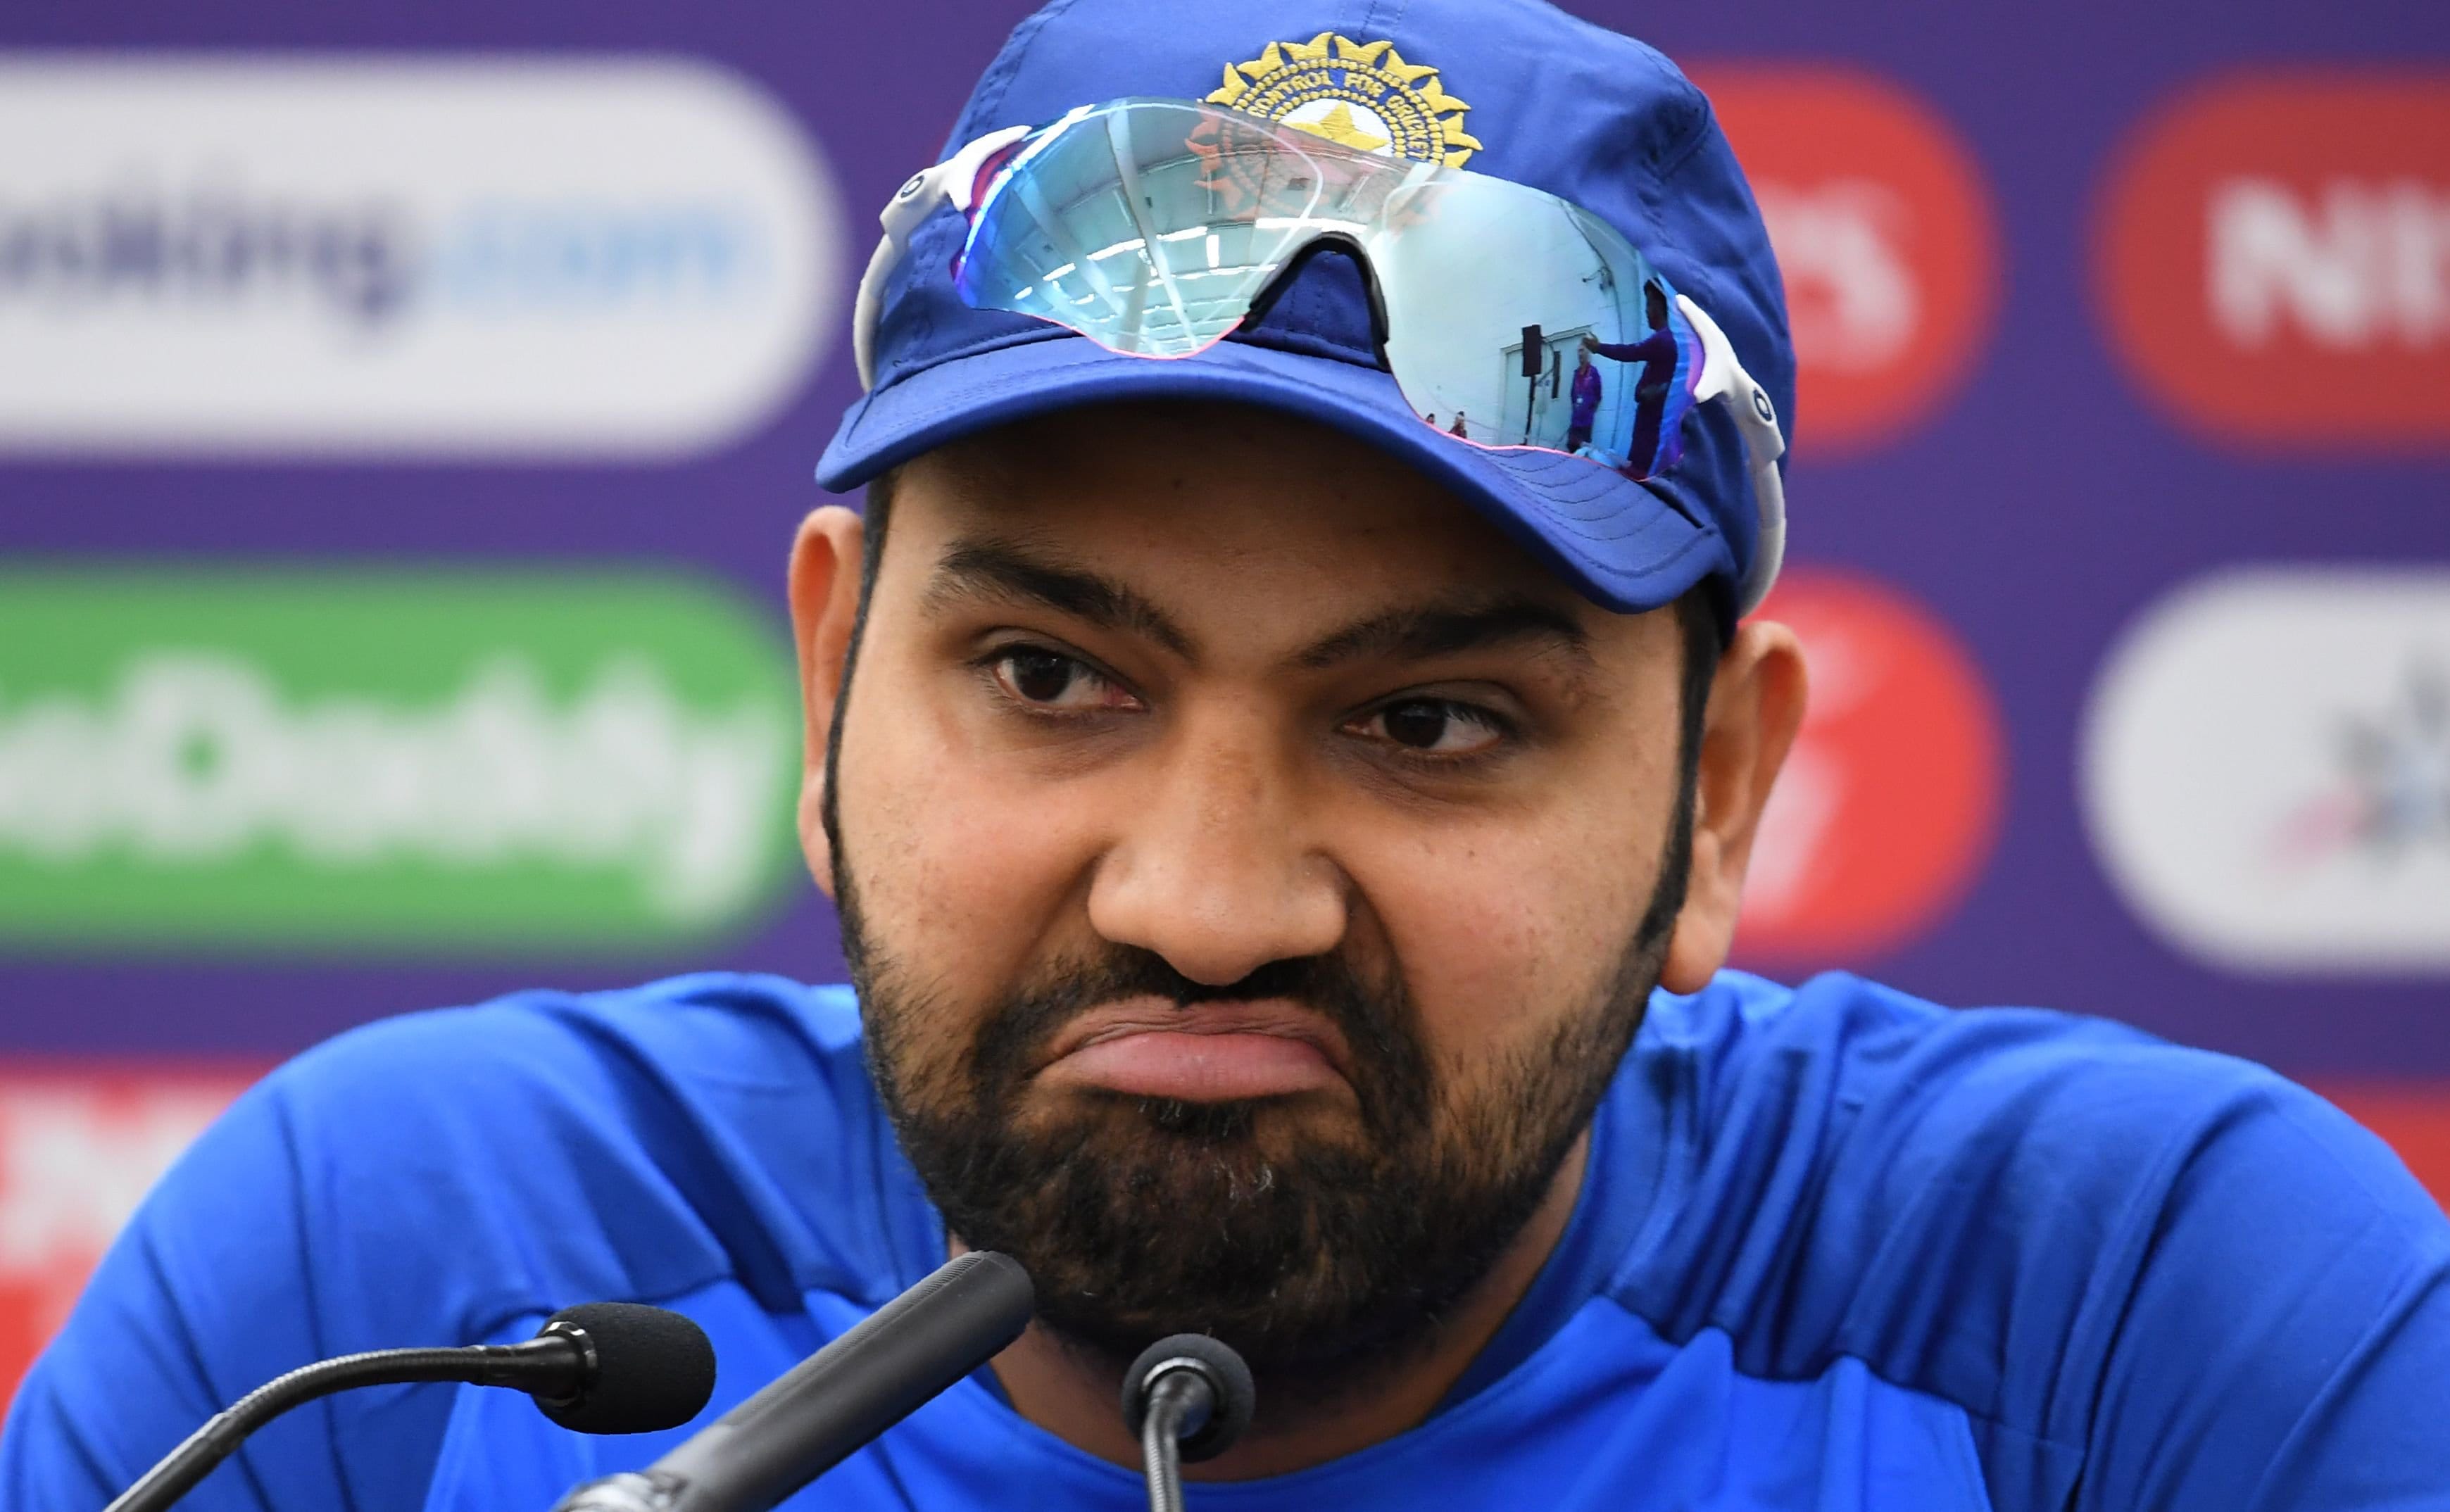 Rohit Sharma Impressed At A Press Conference - Indian Meme Templates